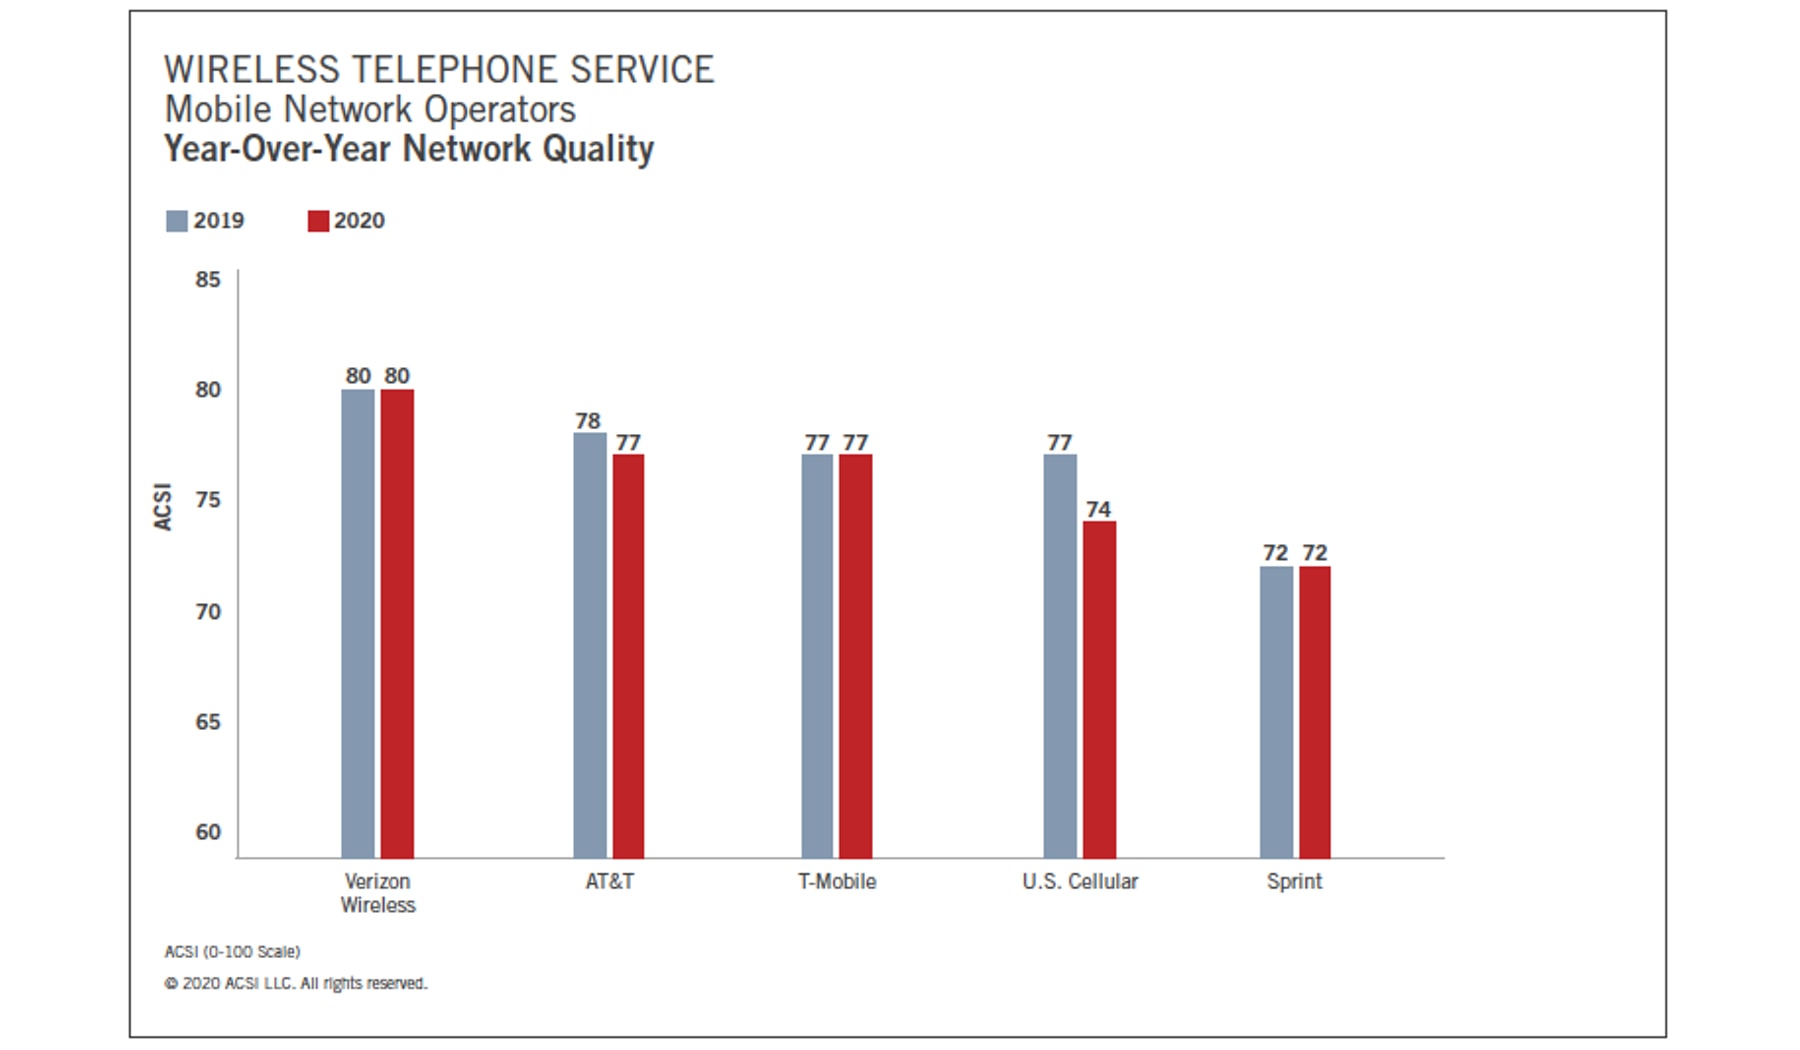 Verizon holds on to first place with consumers as the mobile network with the best quality